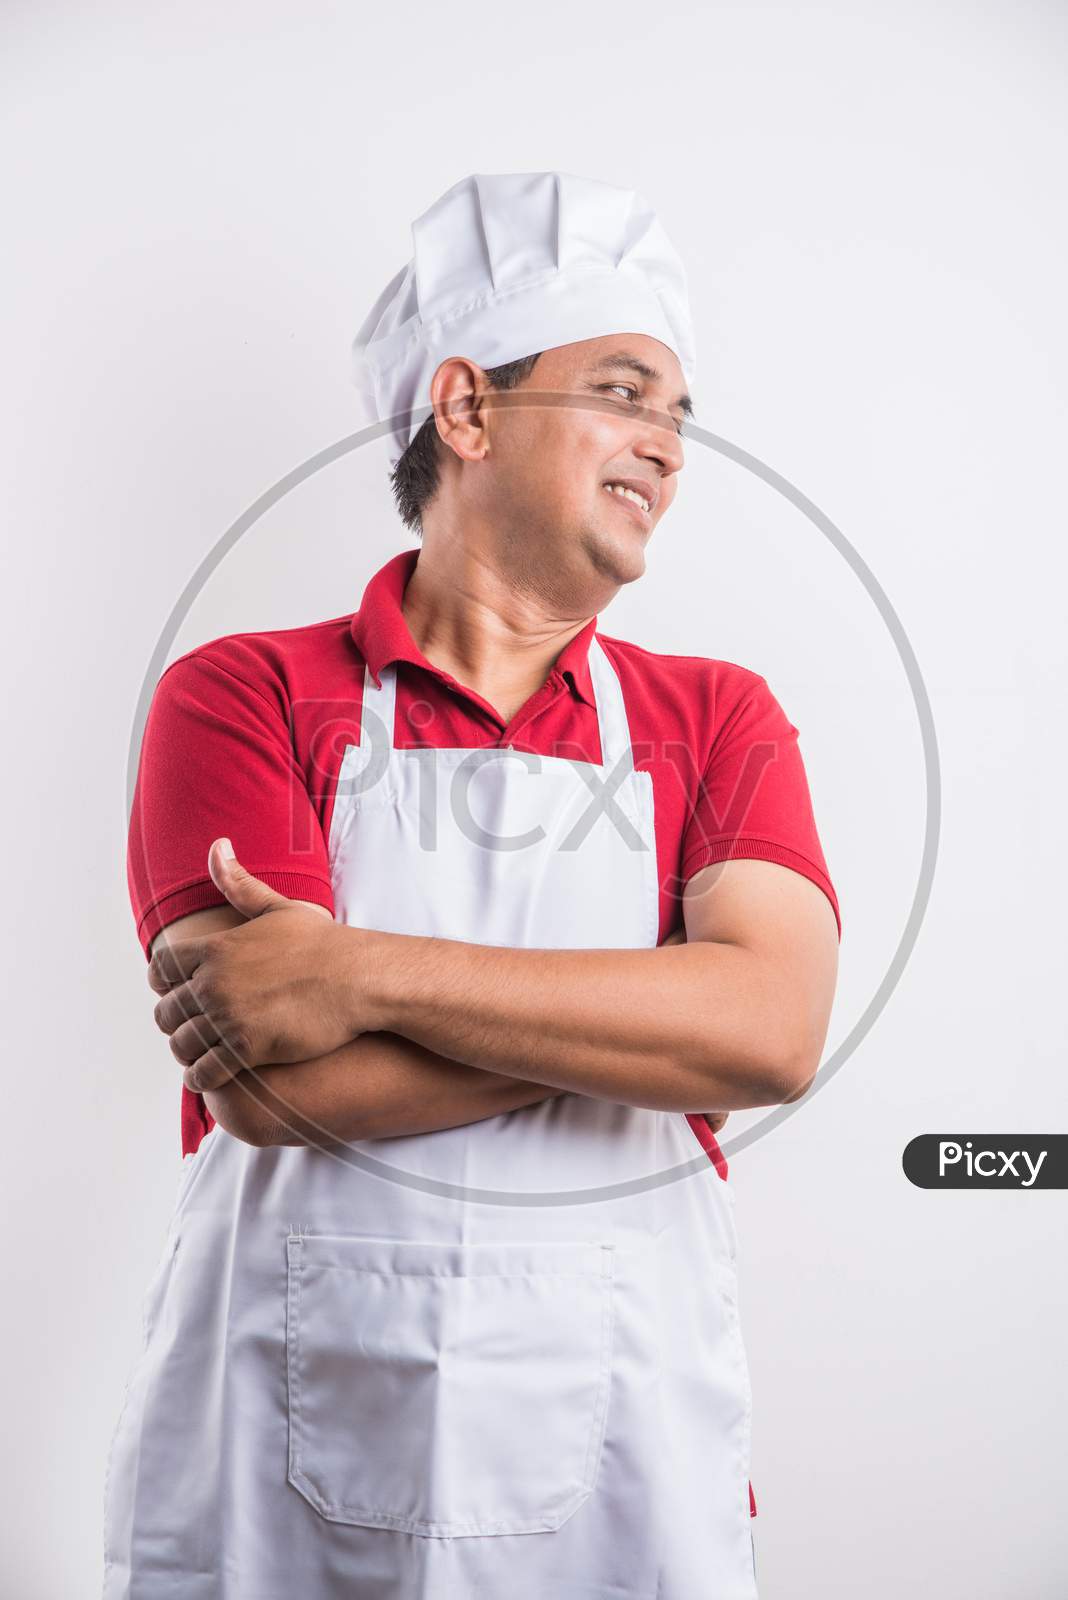 Image Of Indian Male Chef Cook In Apron And Wearing Hat Gl246296 Picxy 